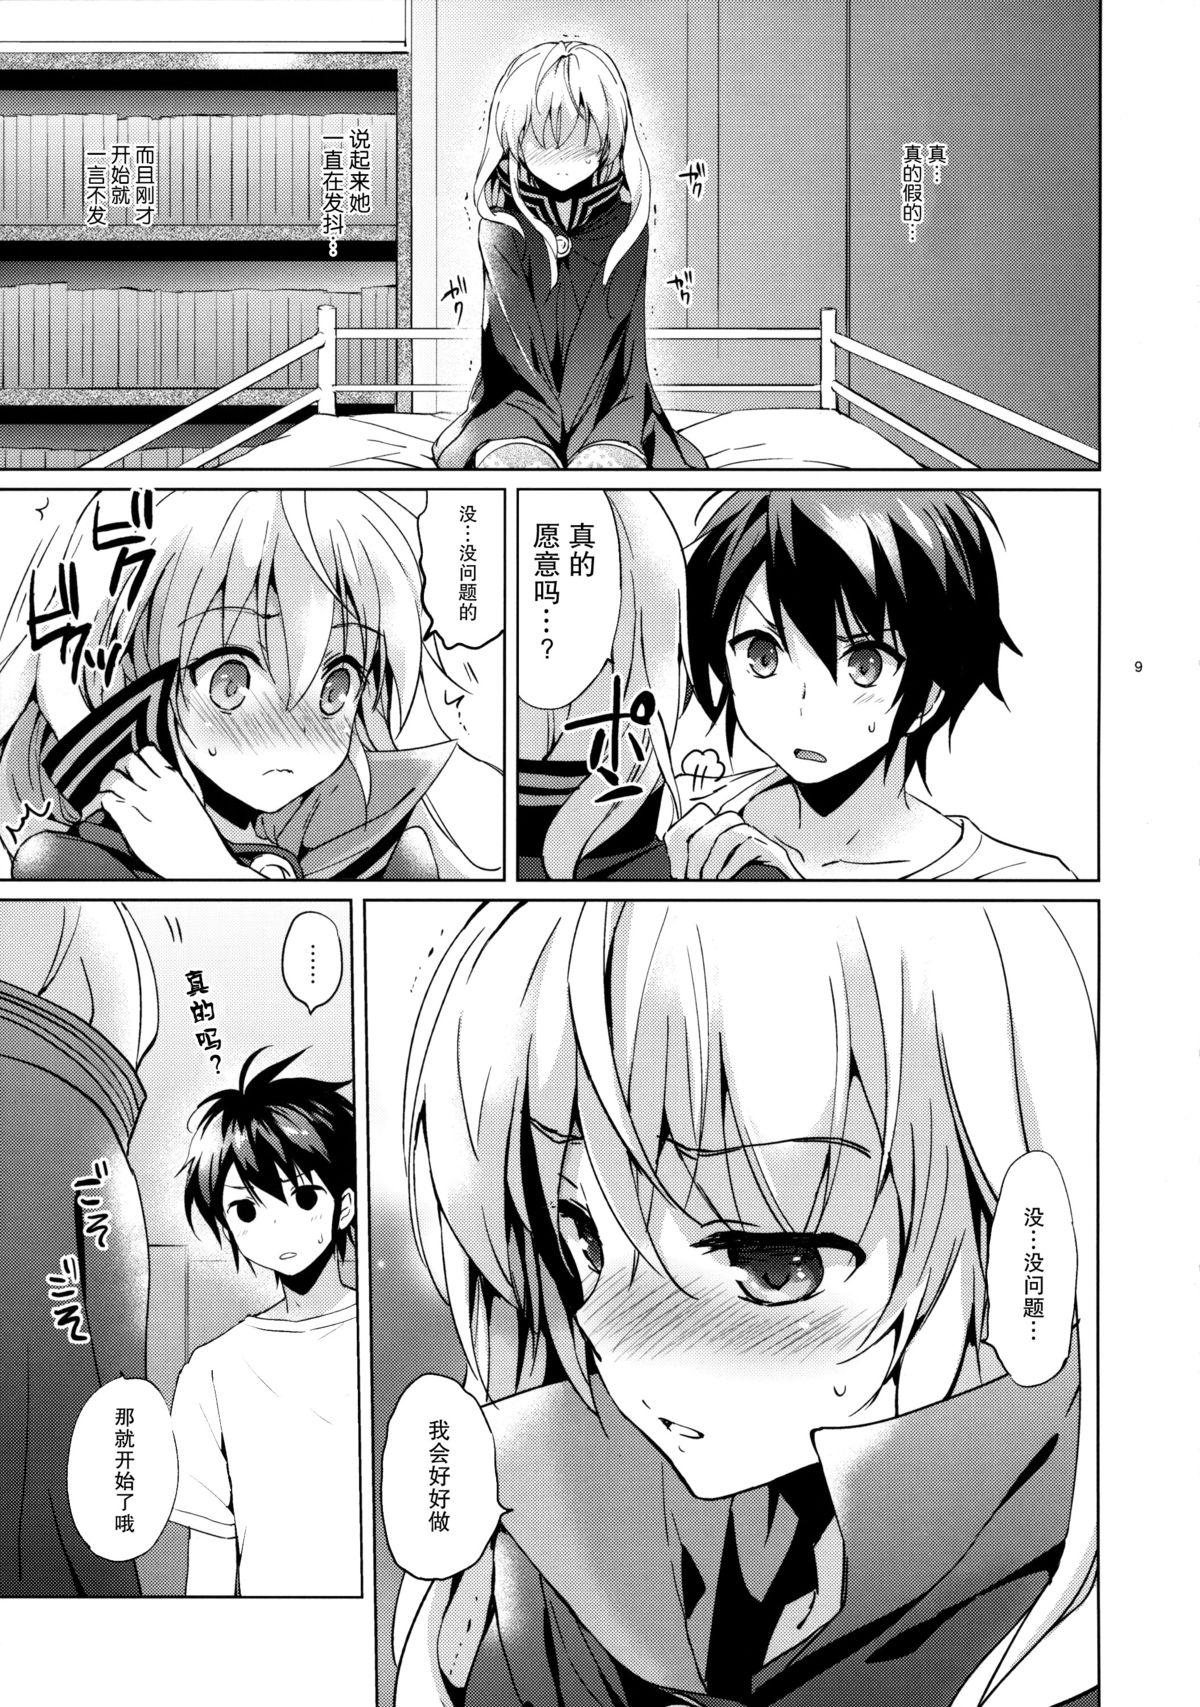 Web Cam Mitsuba Love Story - Seraph of the end Ex Girlfriend - Page 8